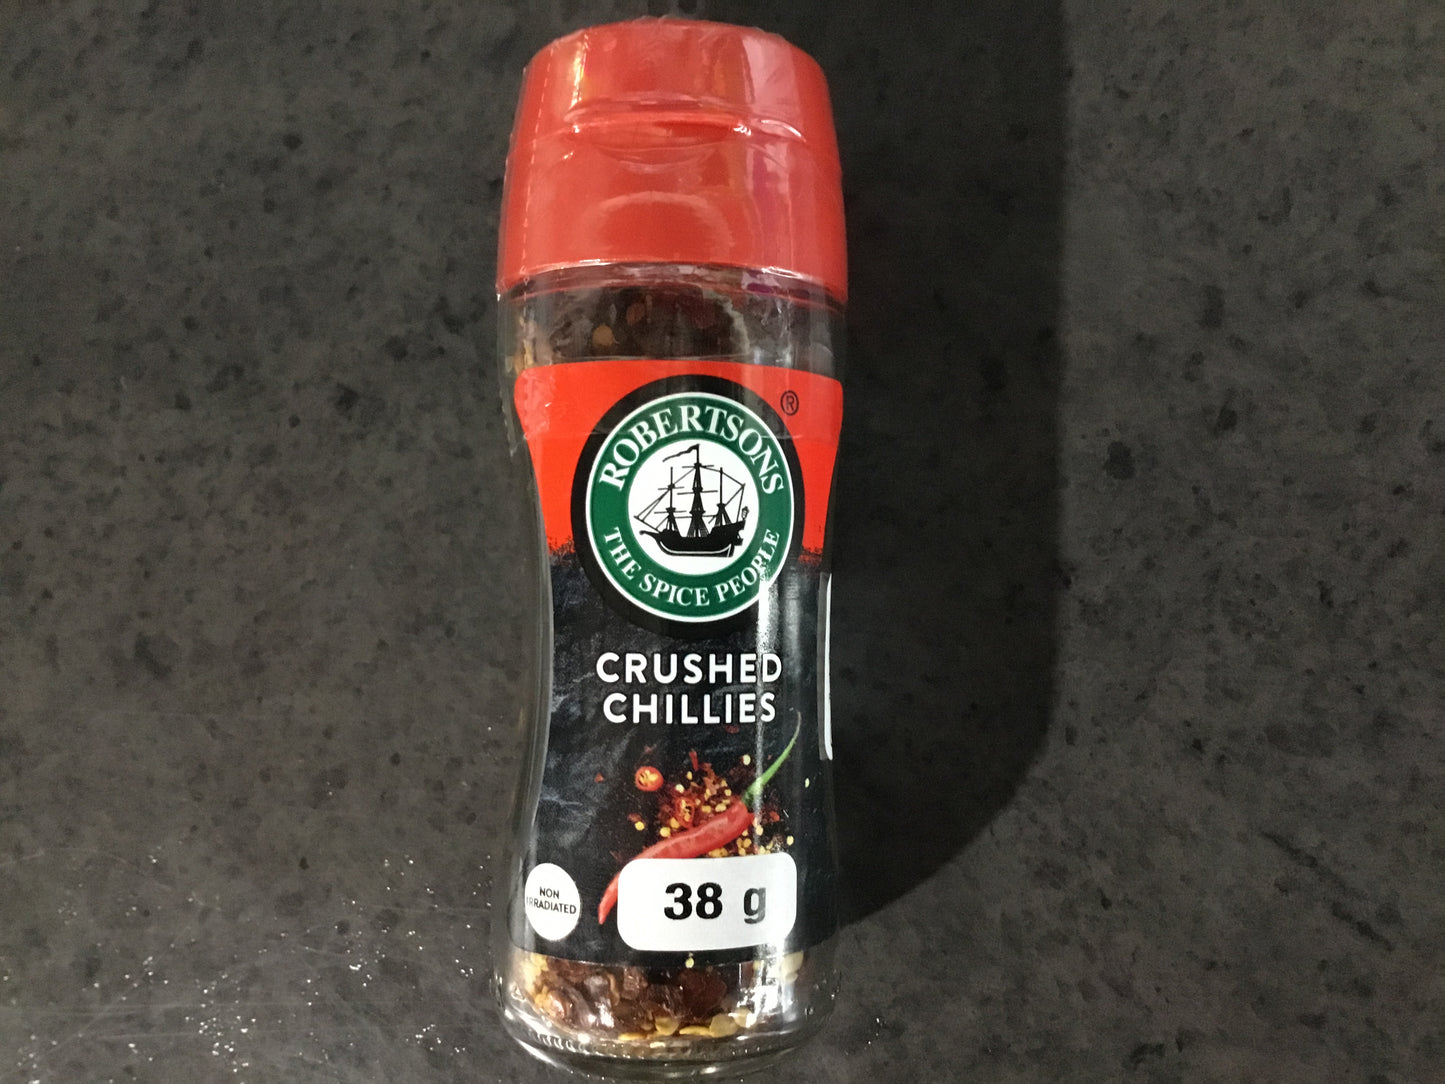 Robertsons Cushed Chillies Bottle 38g